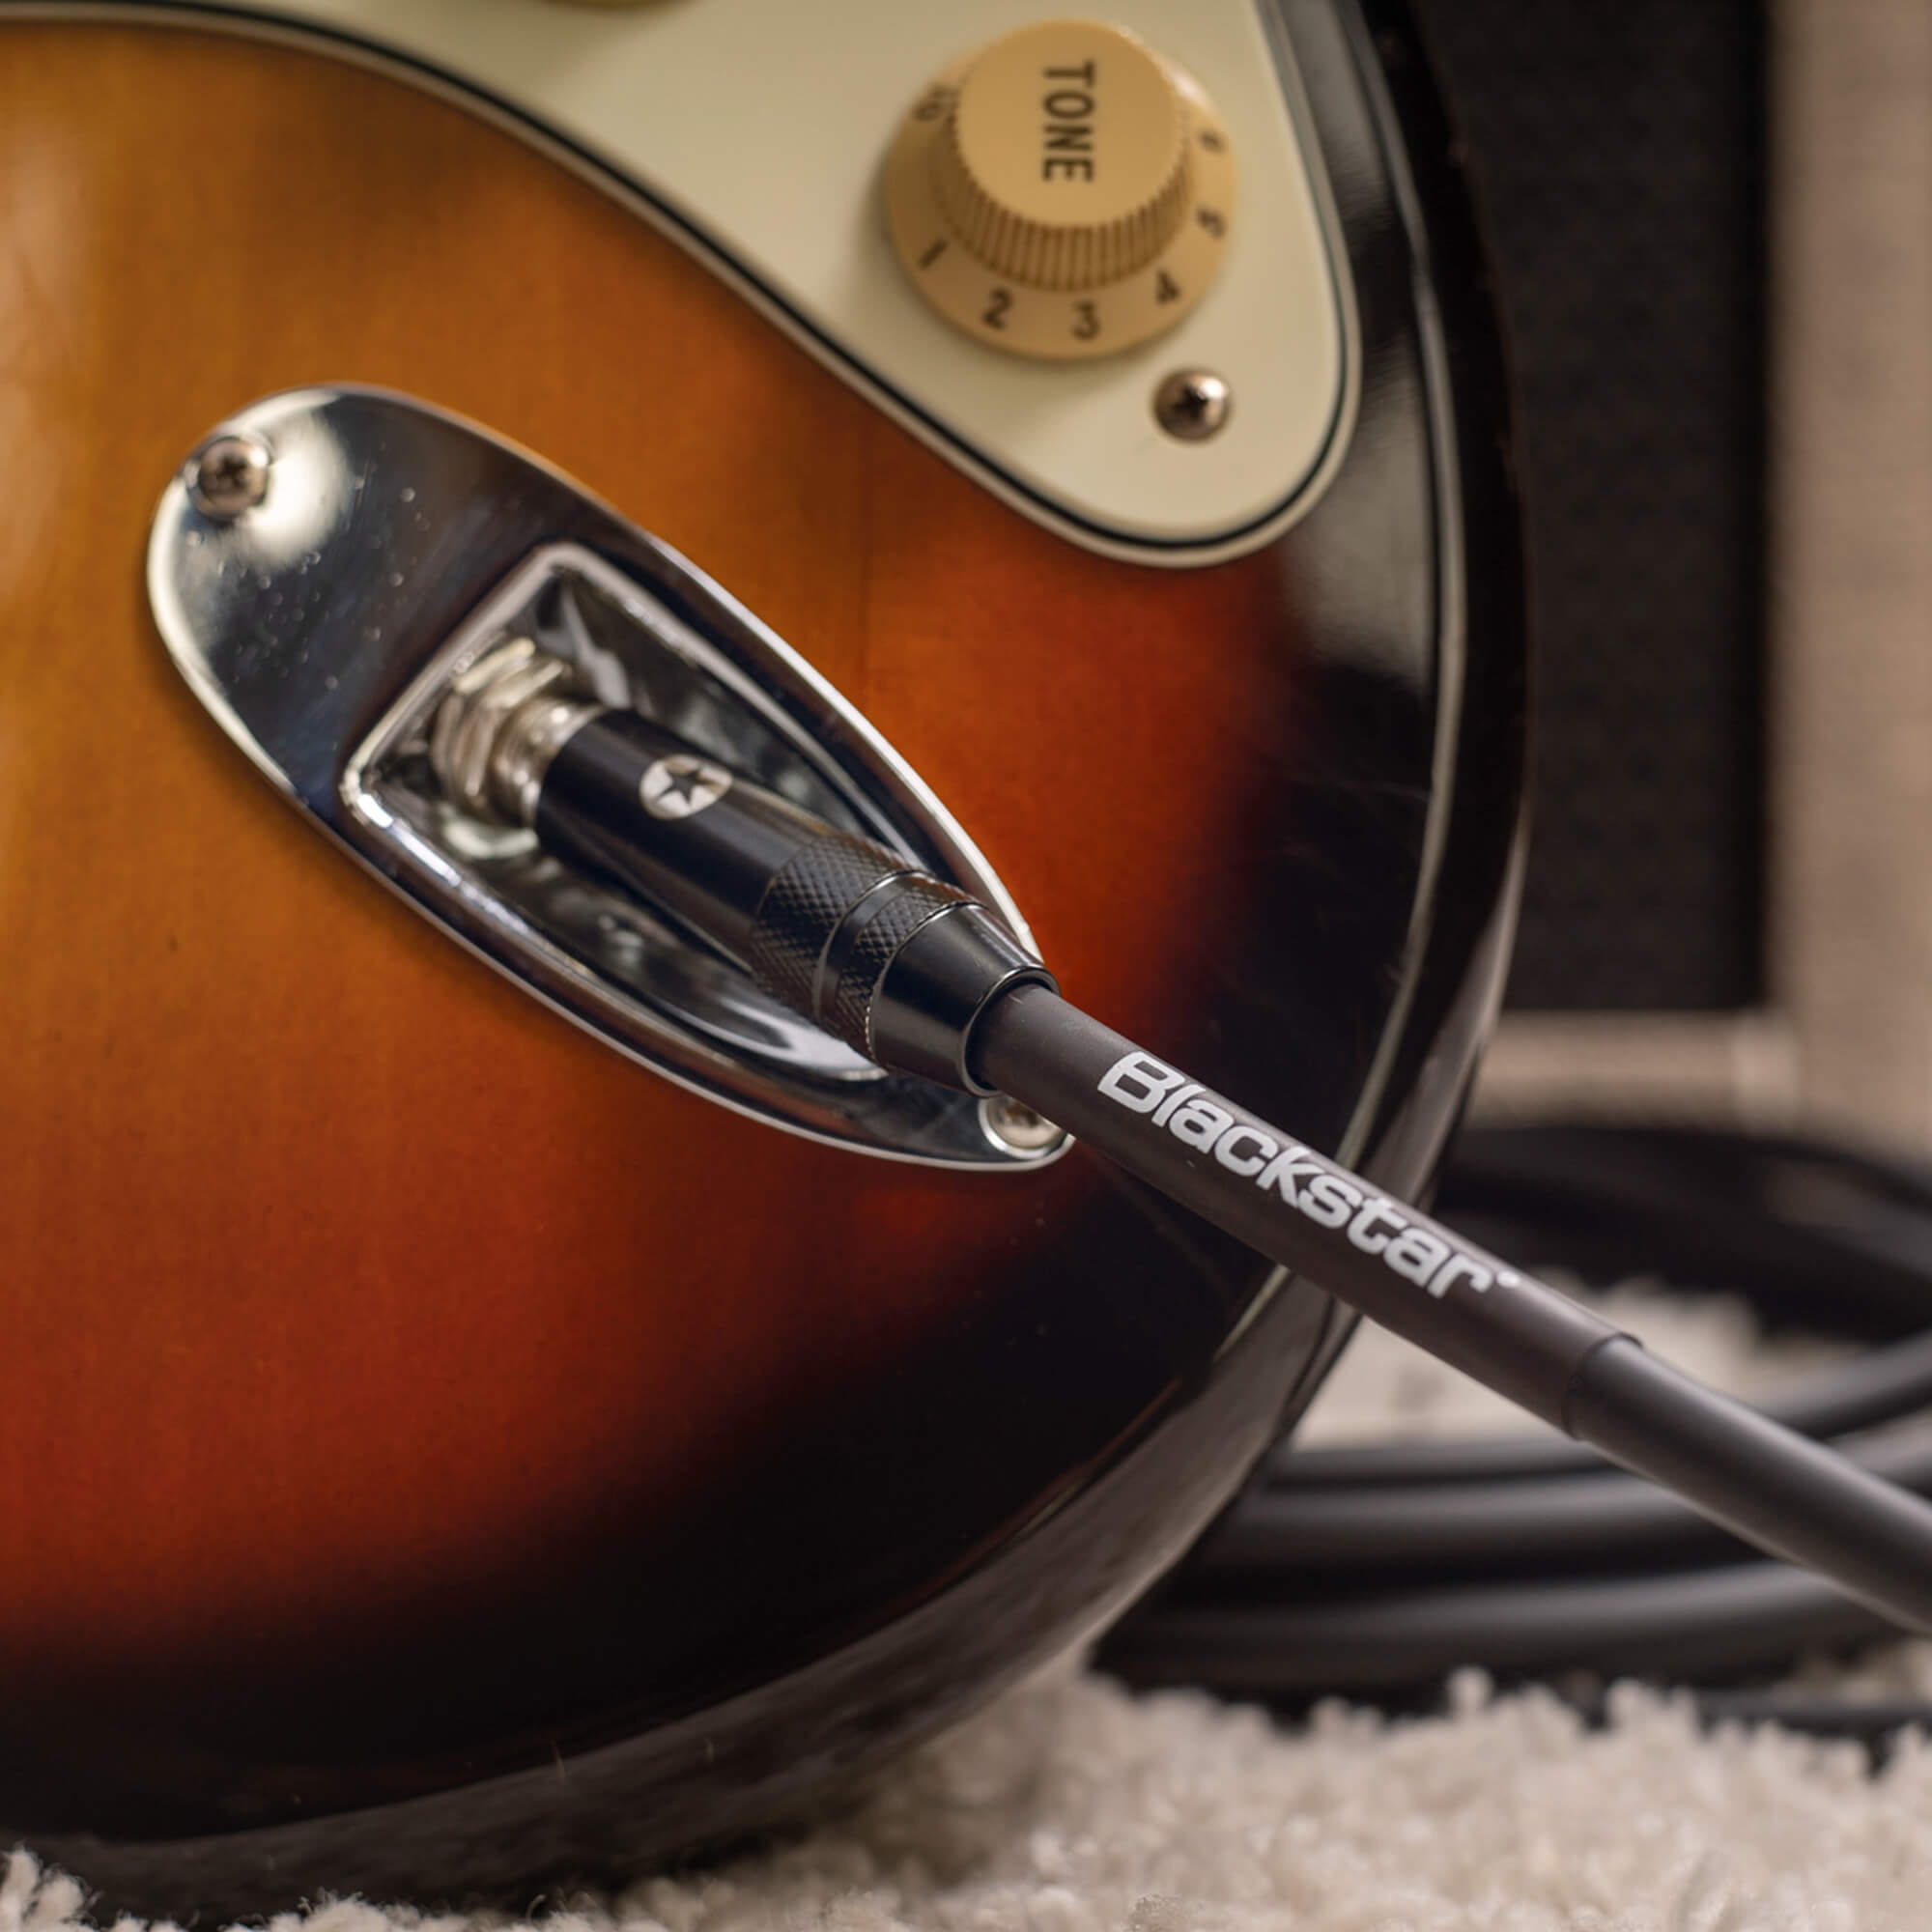 Blackstar instrument cable plugged into guitar